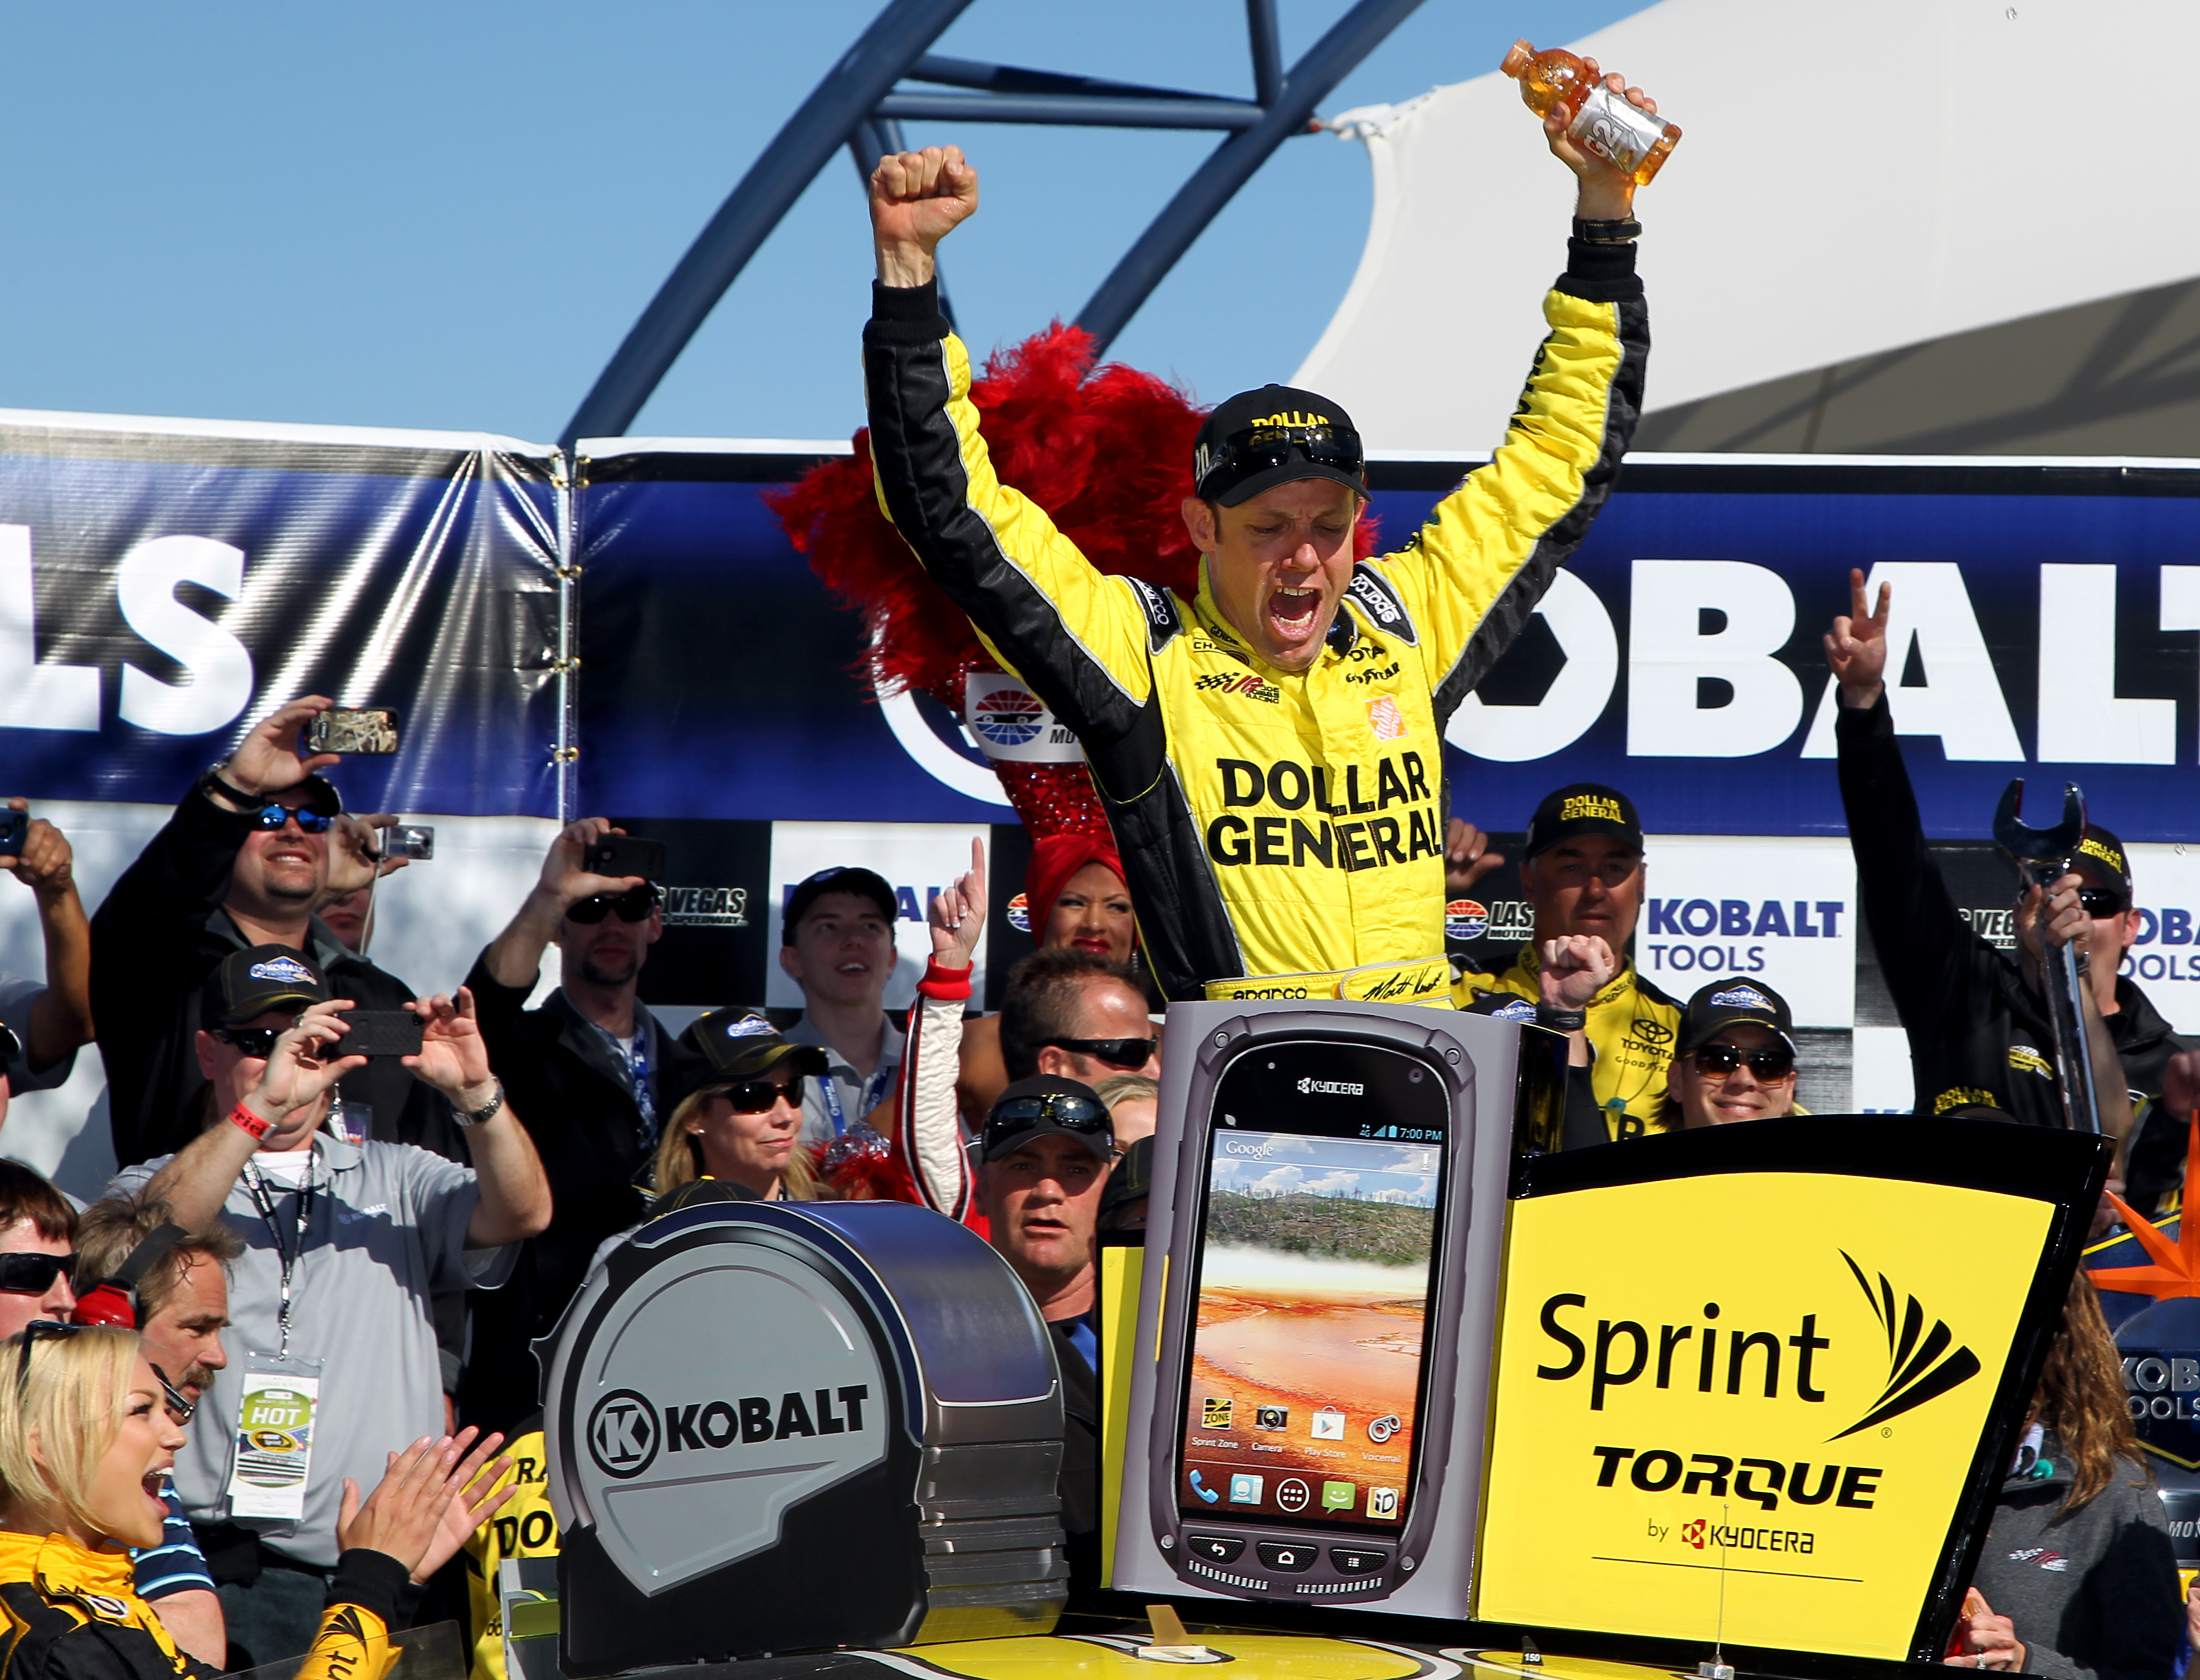 After just three races, one of the four drivers that switched teams in the off-season broke into victory lane.  That was Matt Kenseth, who scored his first win with Joe Gibbs Racing on Sunday.